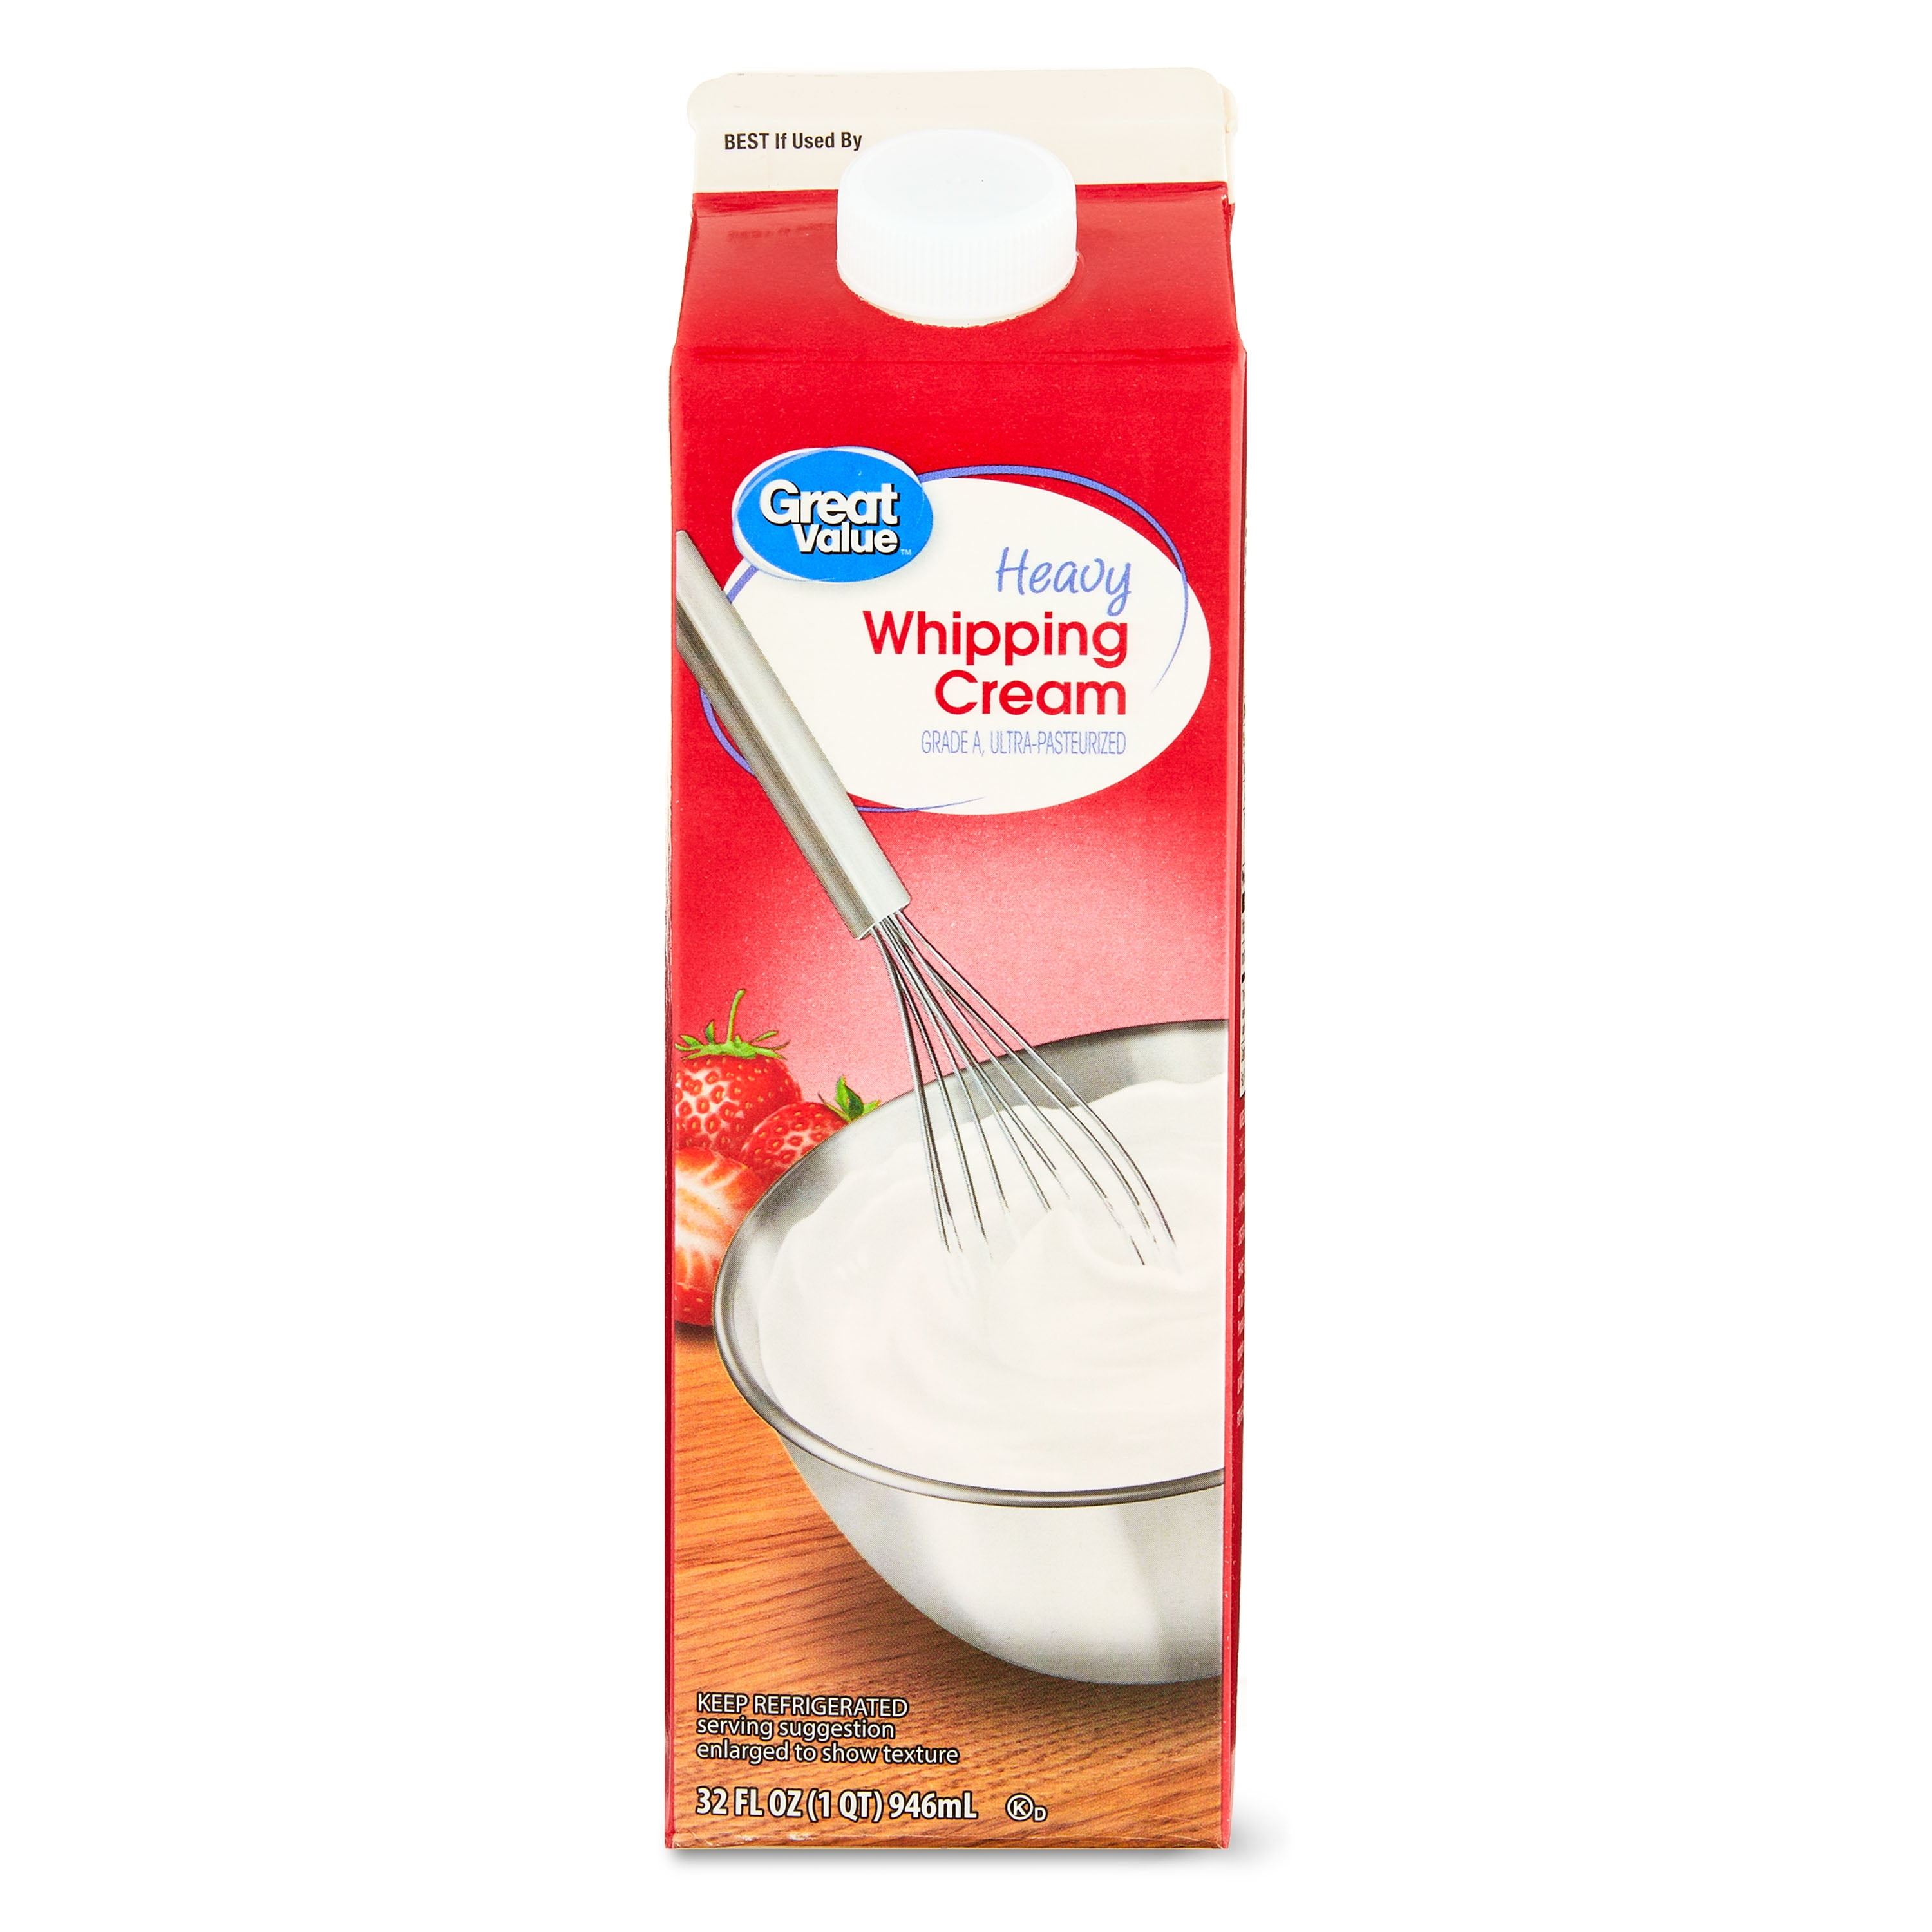 Great Value Heavy Whipping Cream